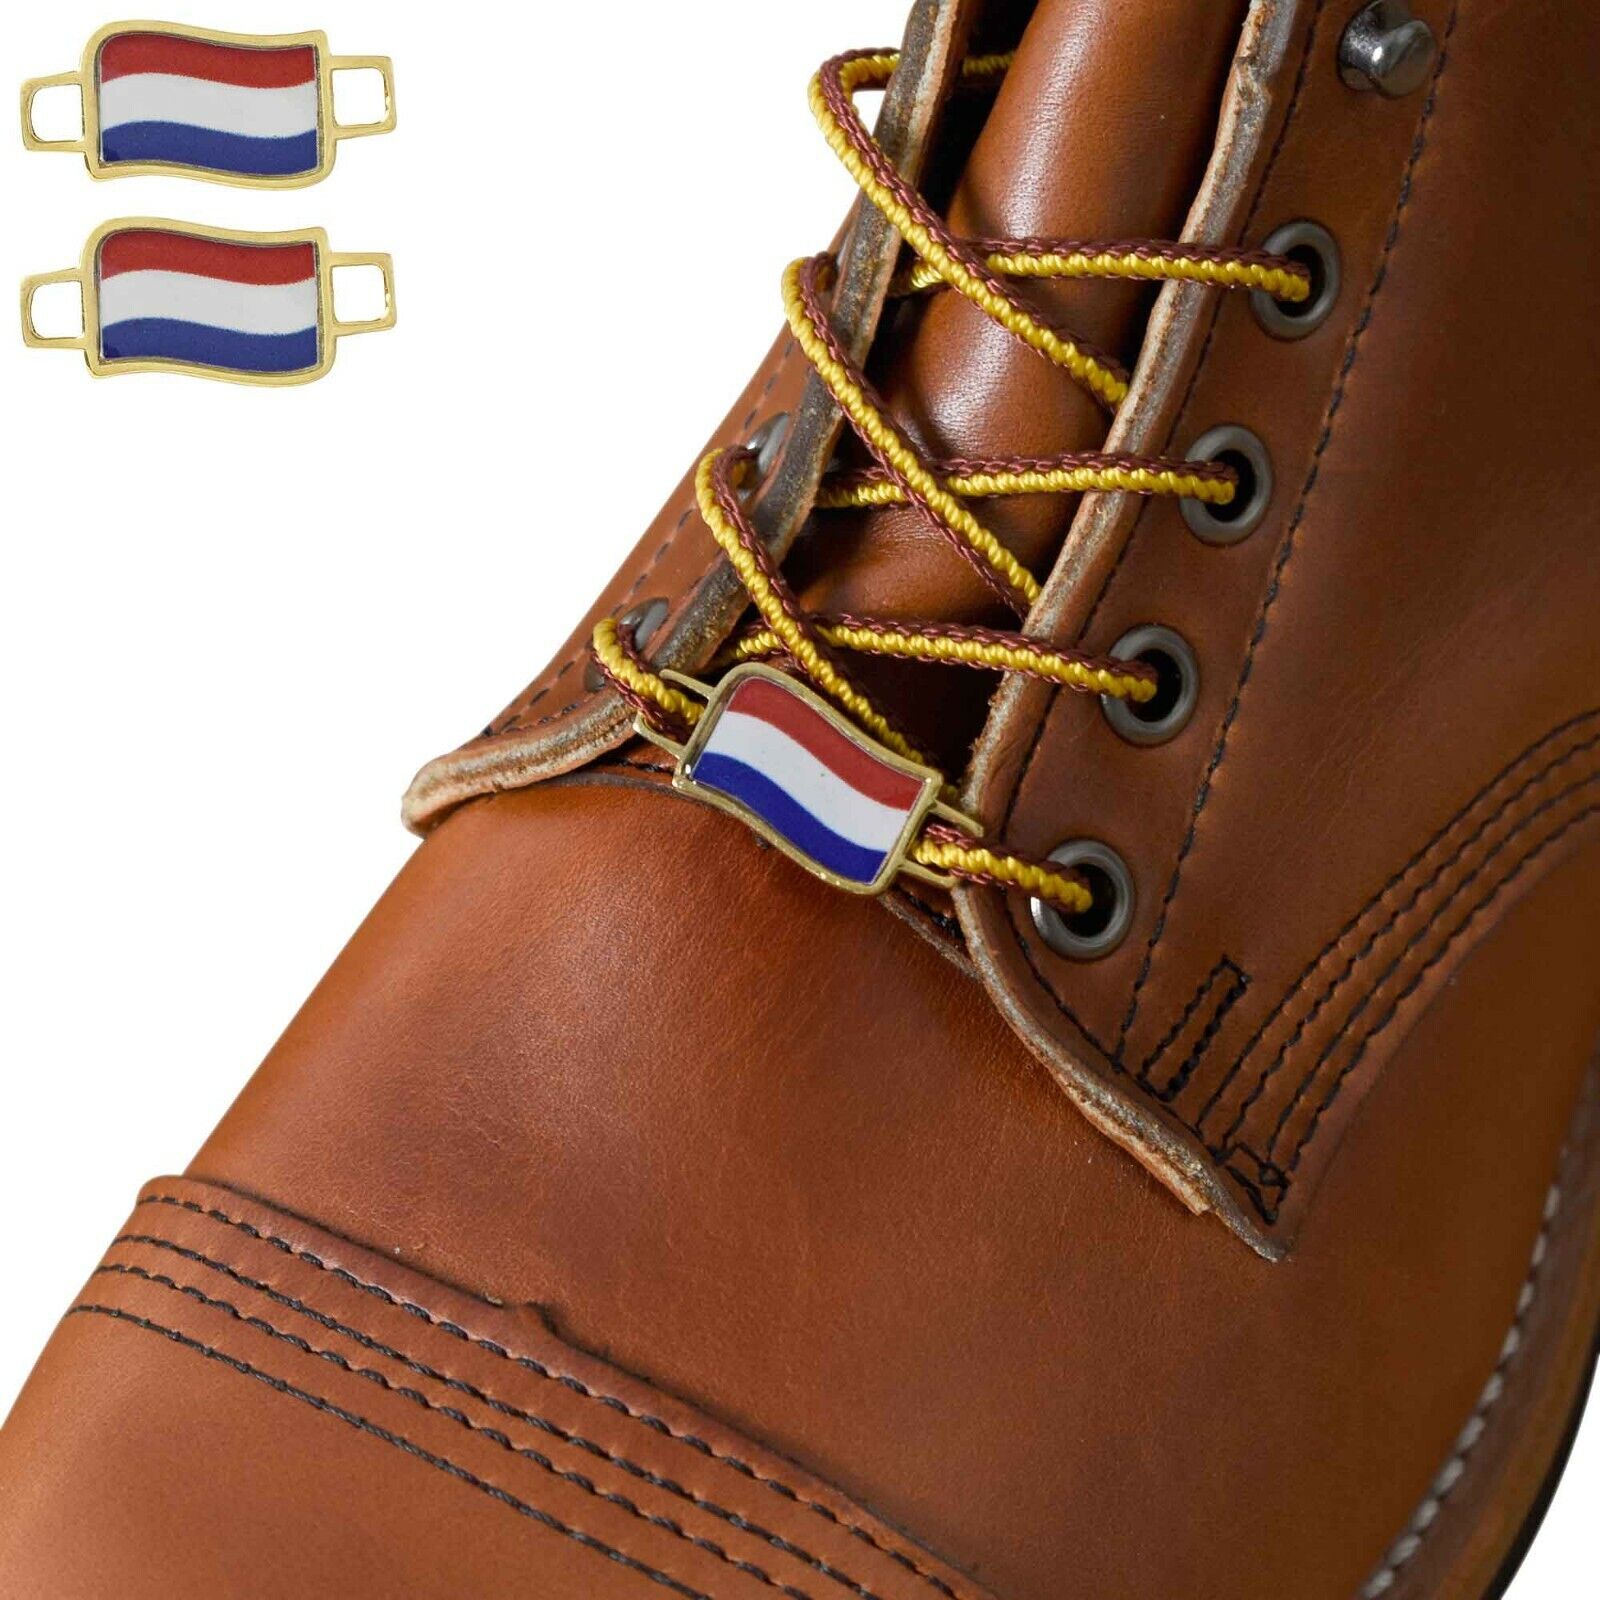 Netherlands Flags Shoes Boot Shoelace Keeper Holder Charm BrooklynMaker